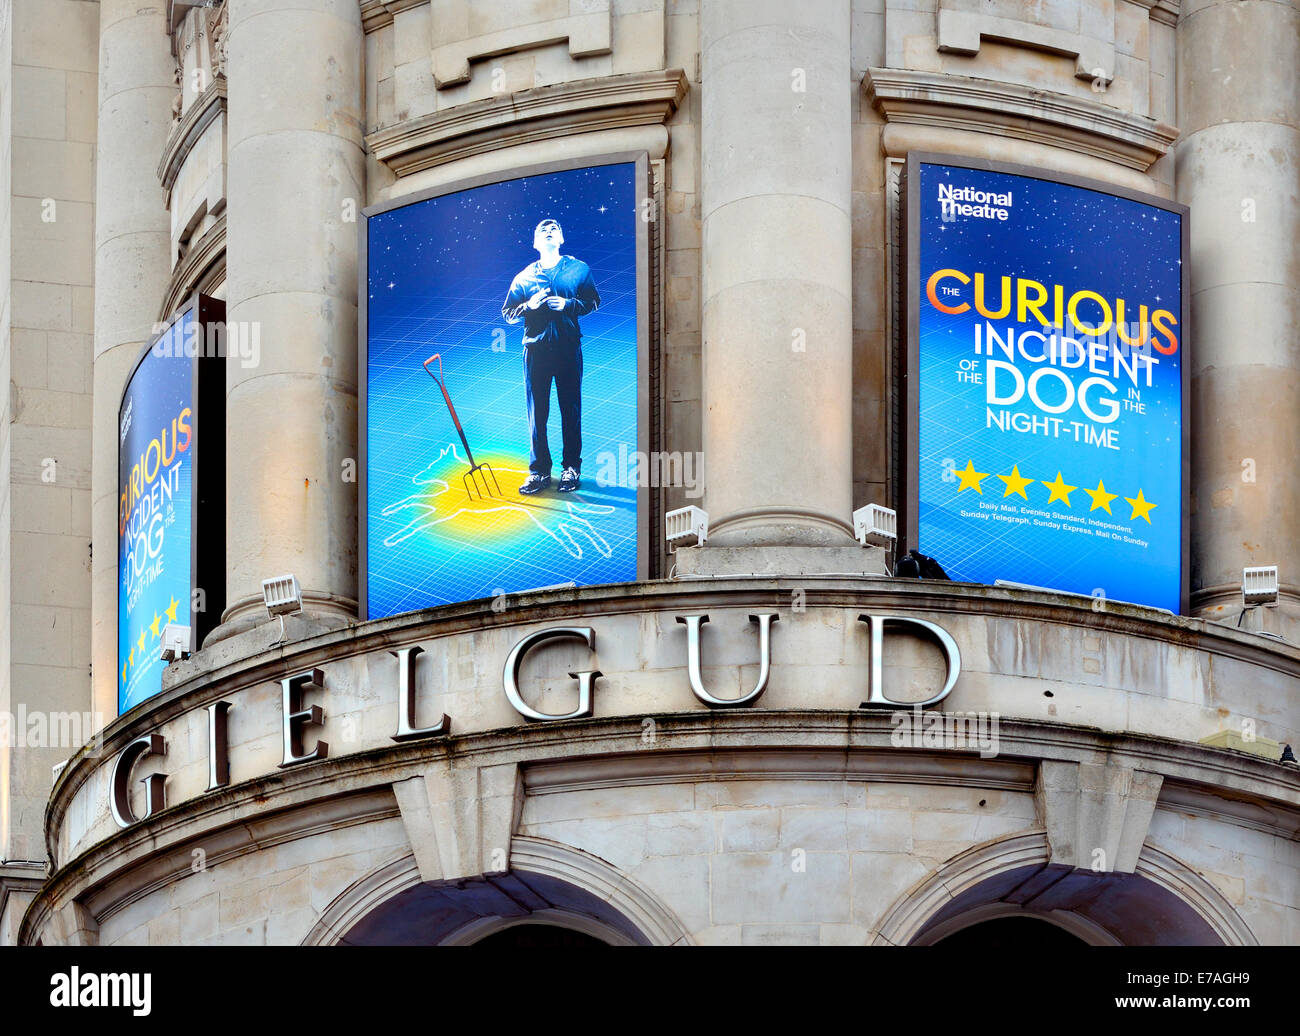 London, England, UK. 'Curious Incident of the Dog in the Night-time' at the Gielgud Theatre, Shaftesbury Avenue, 2014 Stock Photo